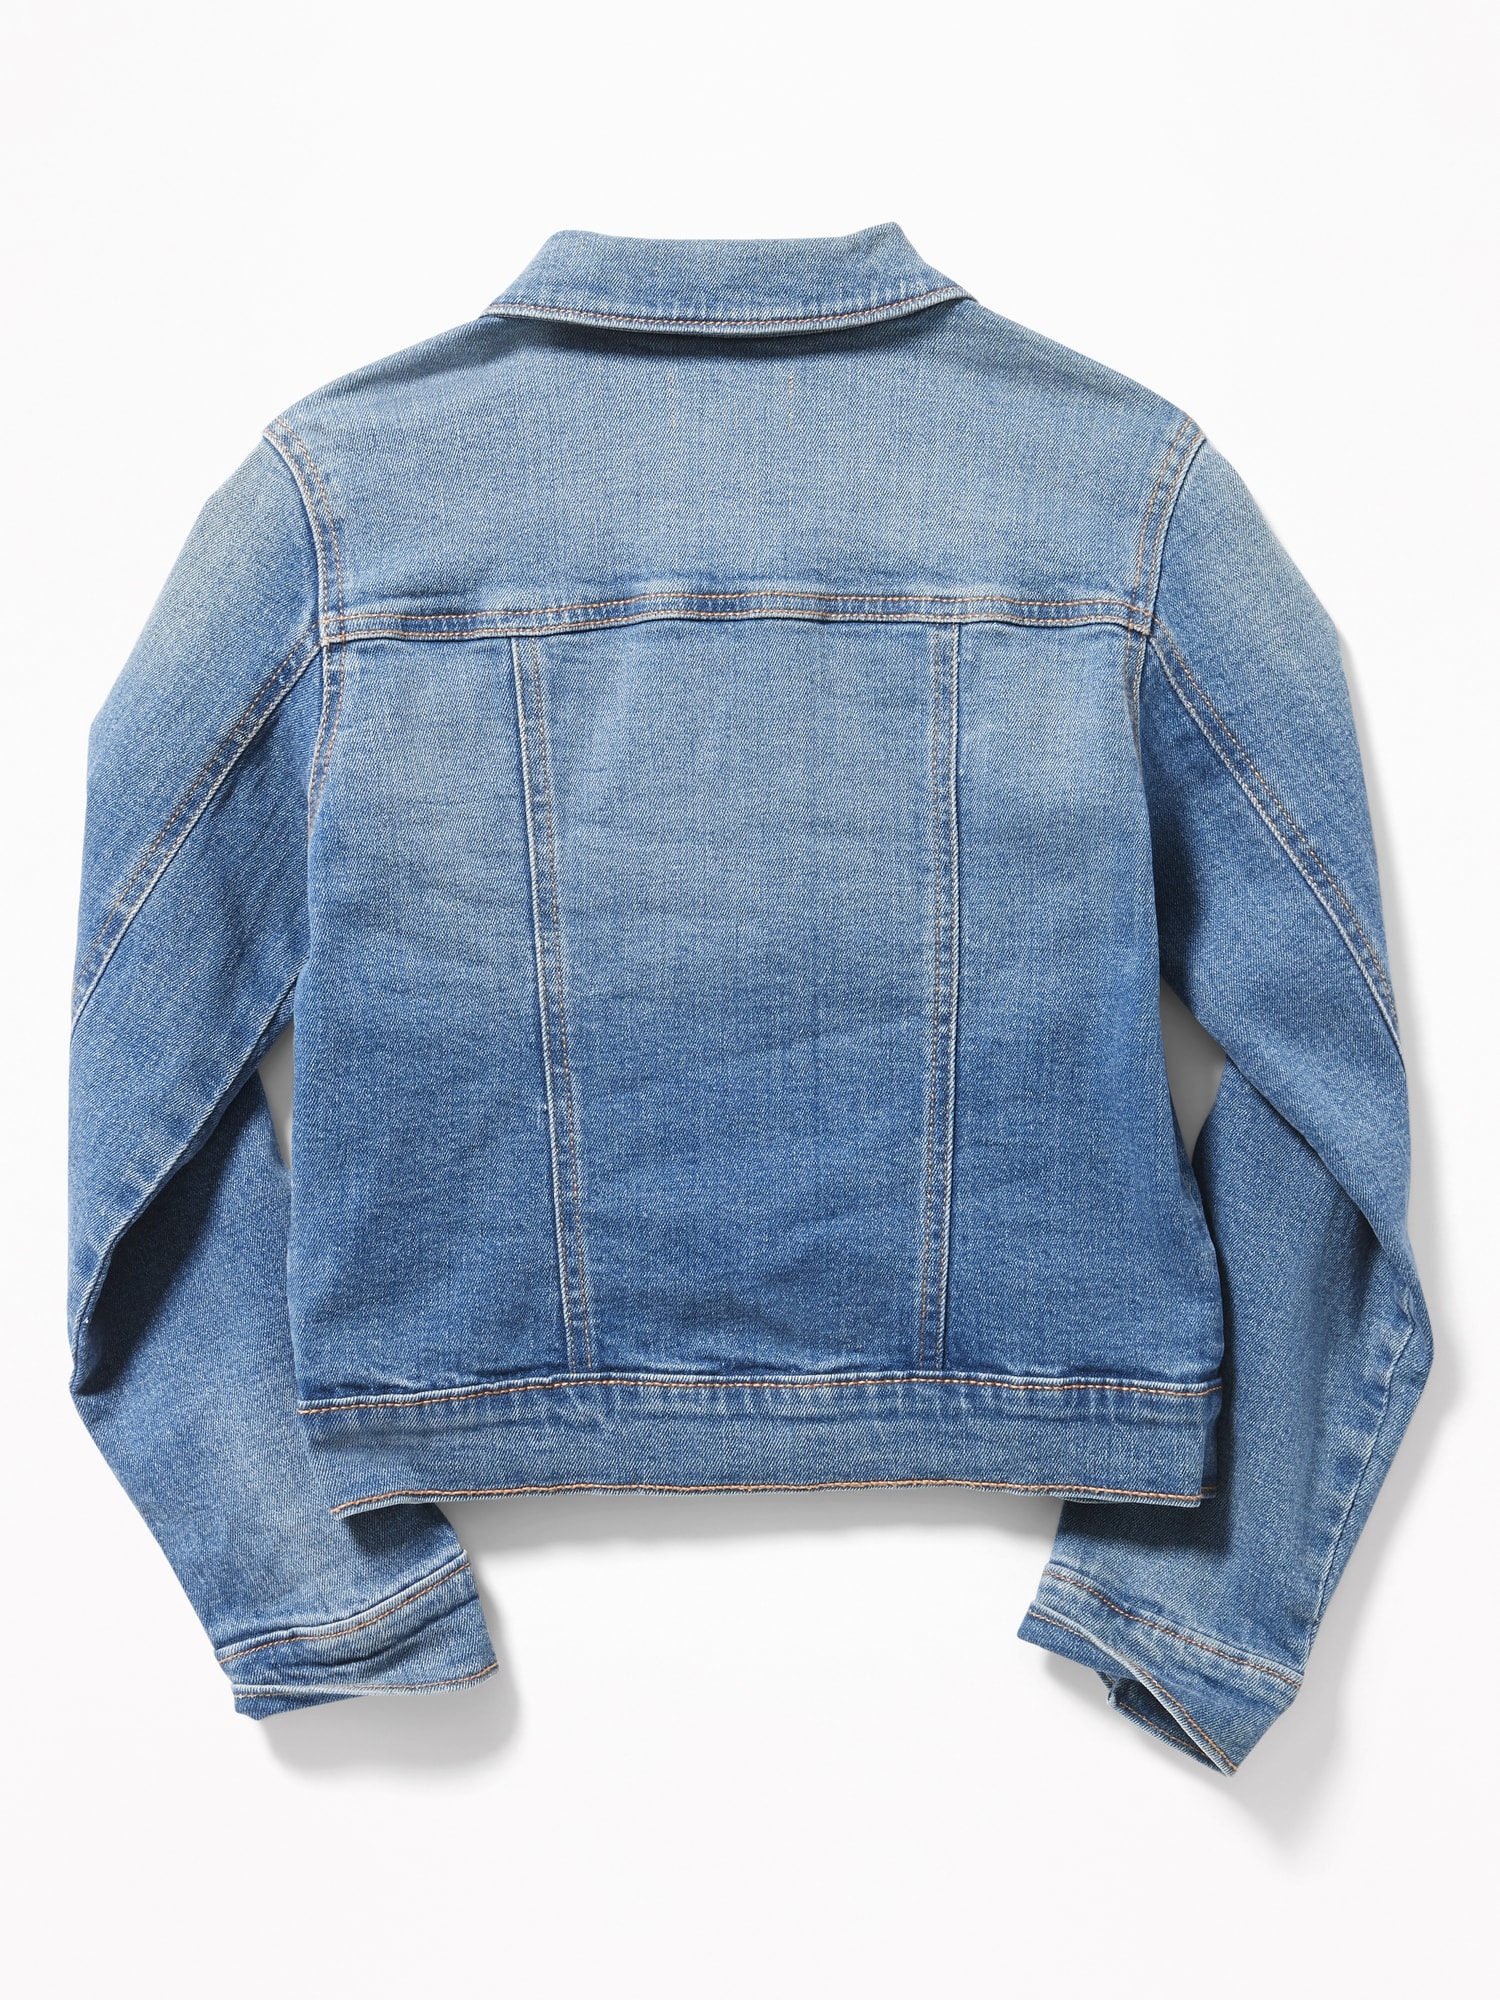 jean jacket with grey sleeves